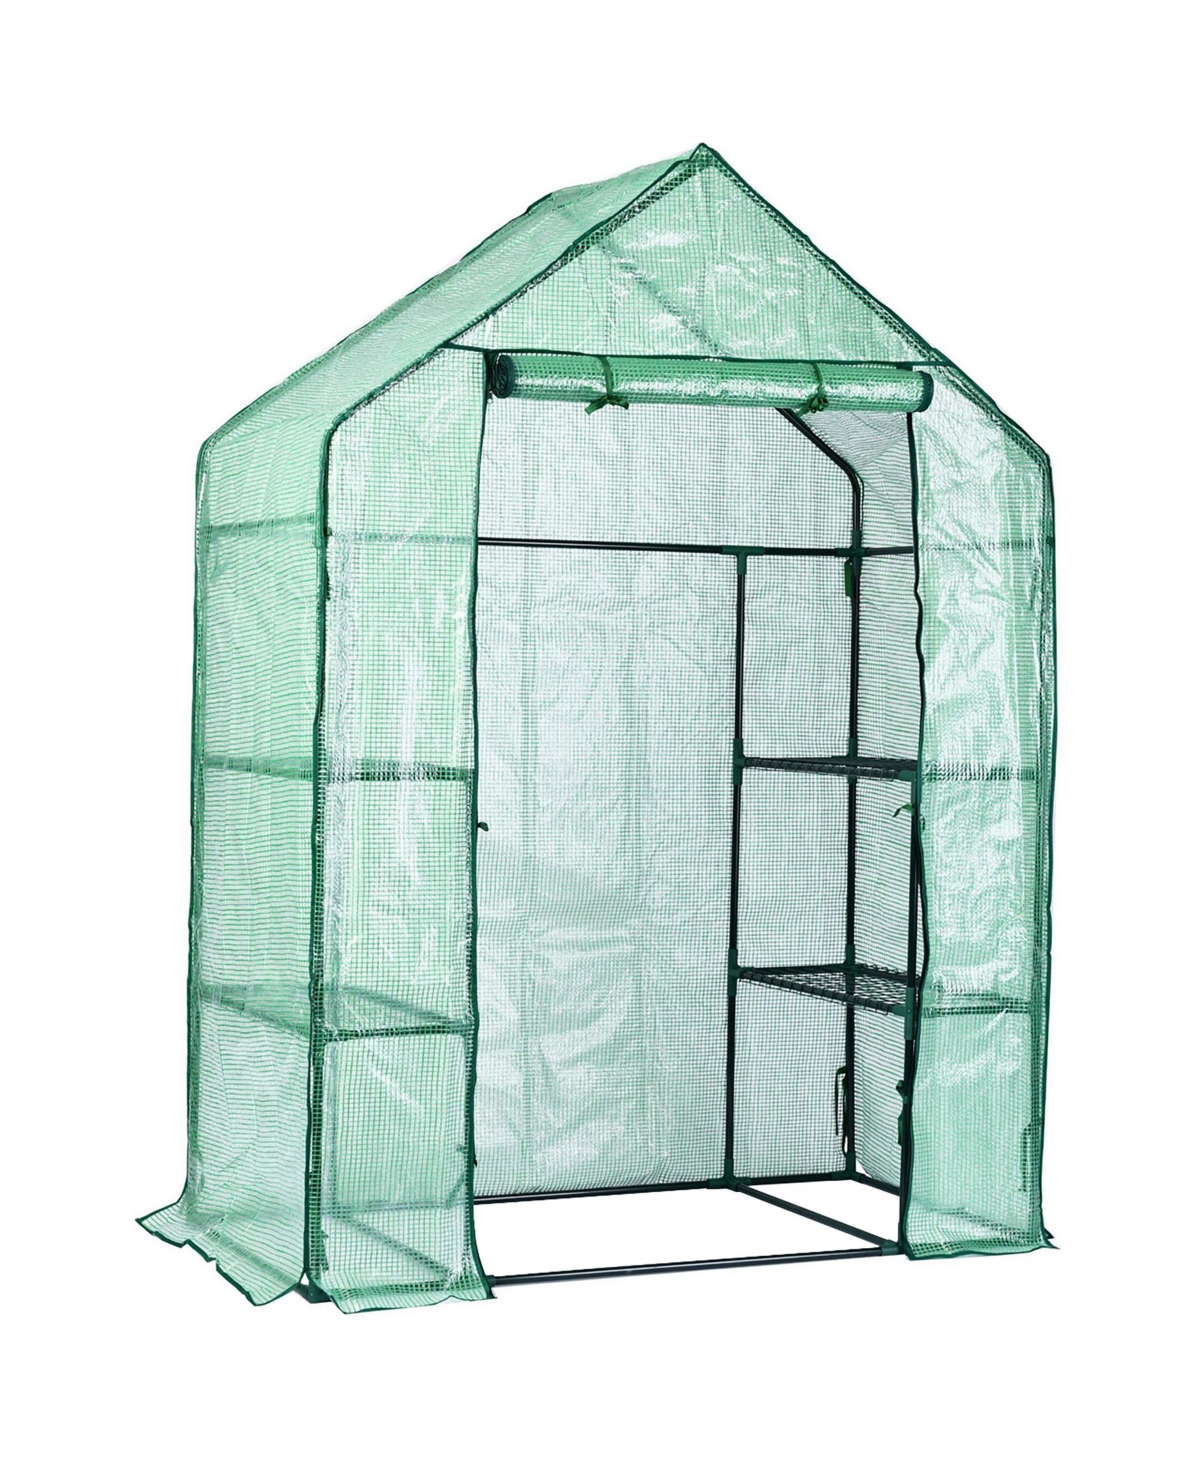 Personal Plastic Indoor Outdoor Standing Greenhouse For Seed Starting and Propagation, Frost Protection Green, Medium, 56 Inches x 29